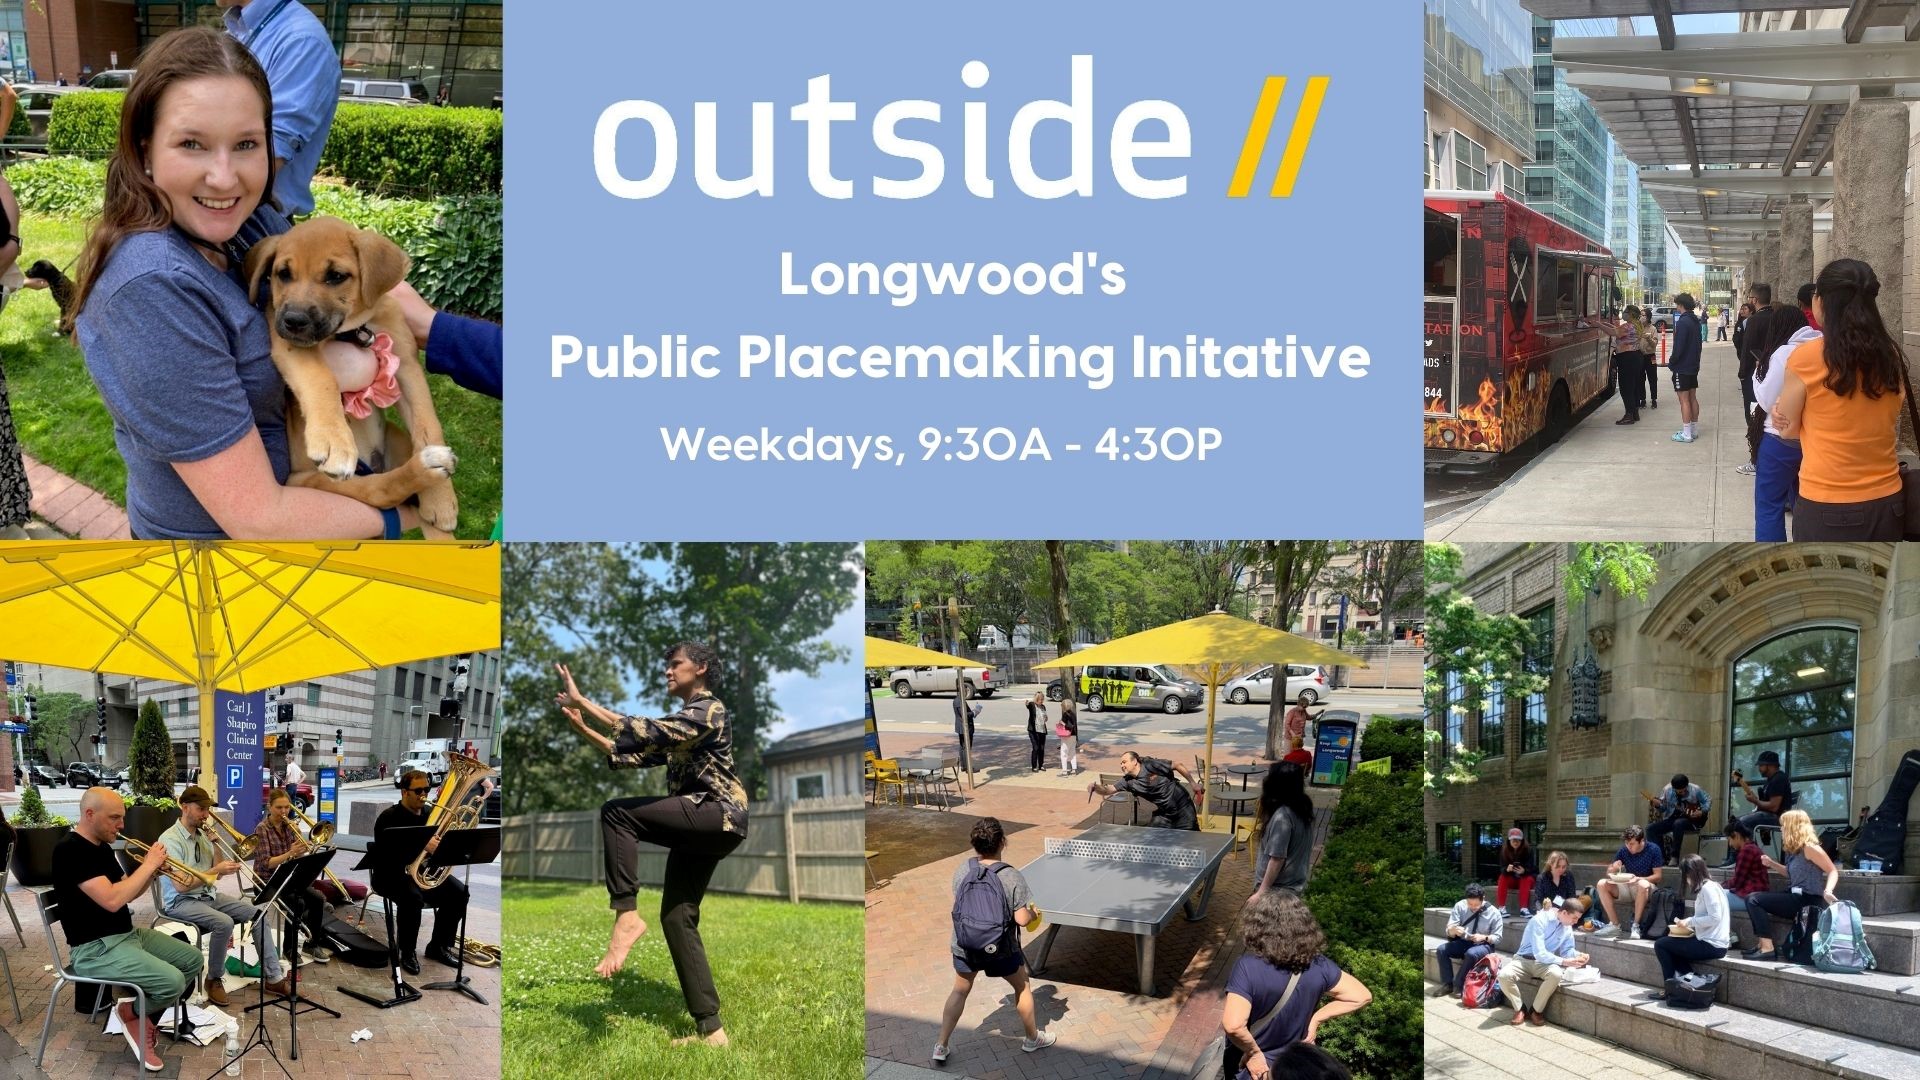 Outside // Longwood's Public Placemaking Initiative, Weekdays 9:30 a - 4:30 p. Photo collage: top left person holding puppy (Wag Wednesday program), top right - food truck line, bottom left - live music performance, bottom center - yoga and ping pong, bottom right - people on outside steps of BIDMC Outside // site